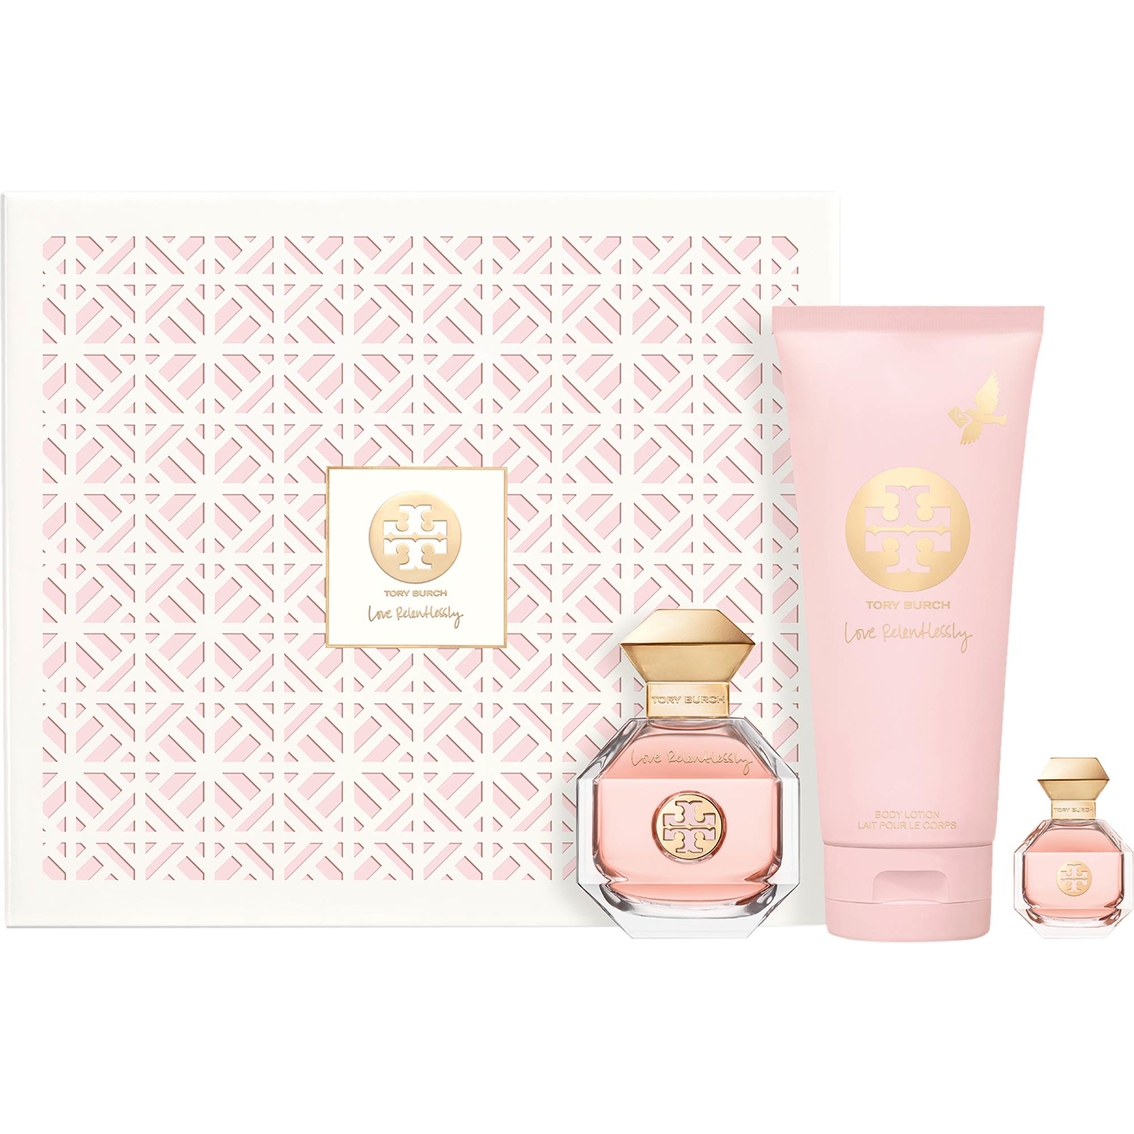 Tory Burch Love Relentlessly Delux 3 Pc. Holiday Gift Set | Gift Sets ...